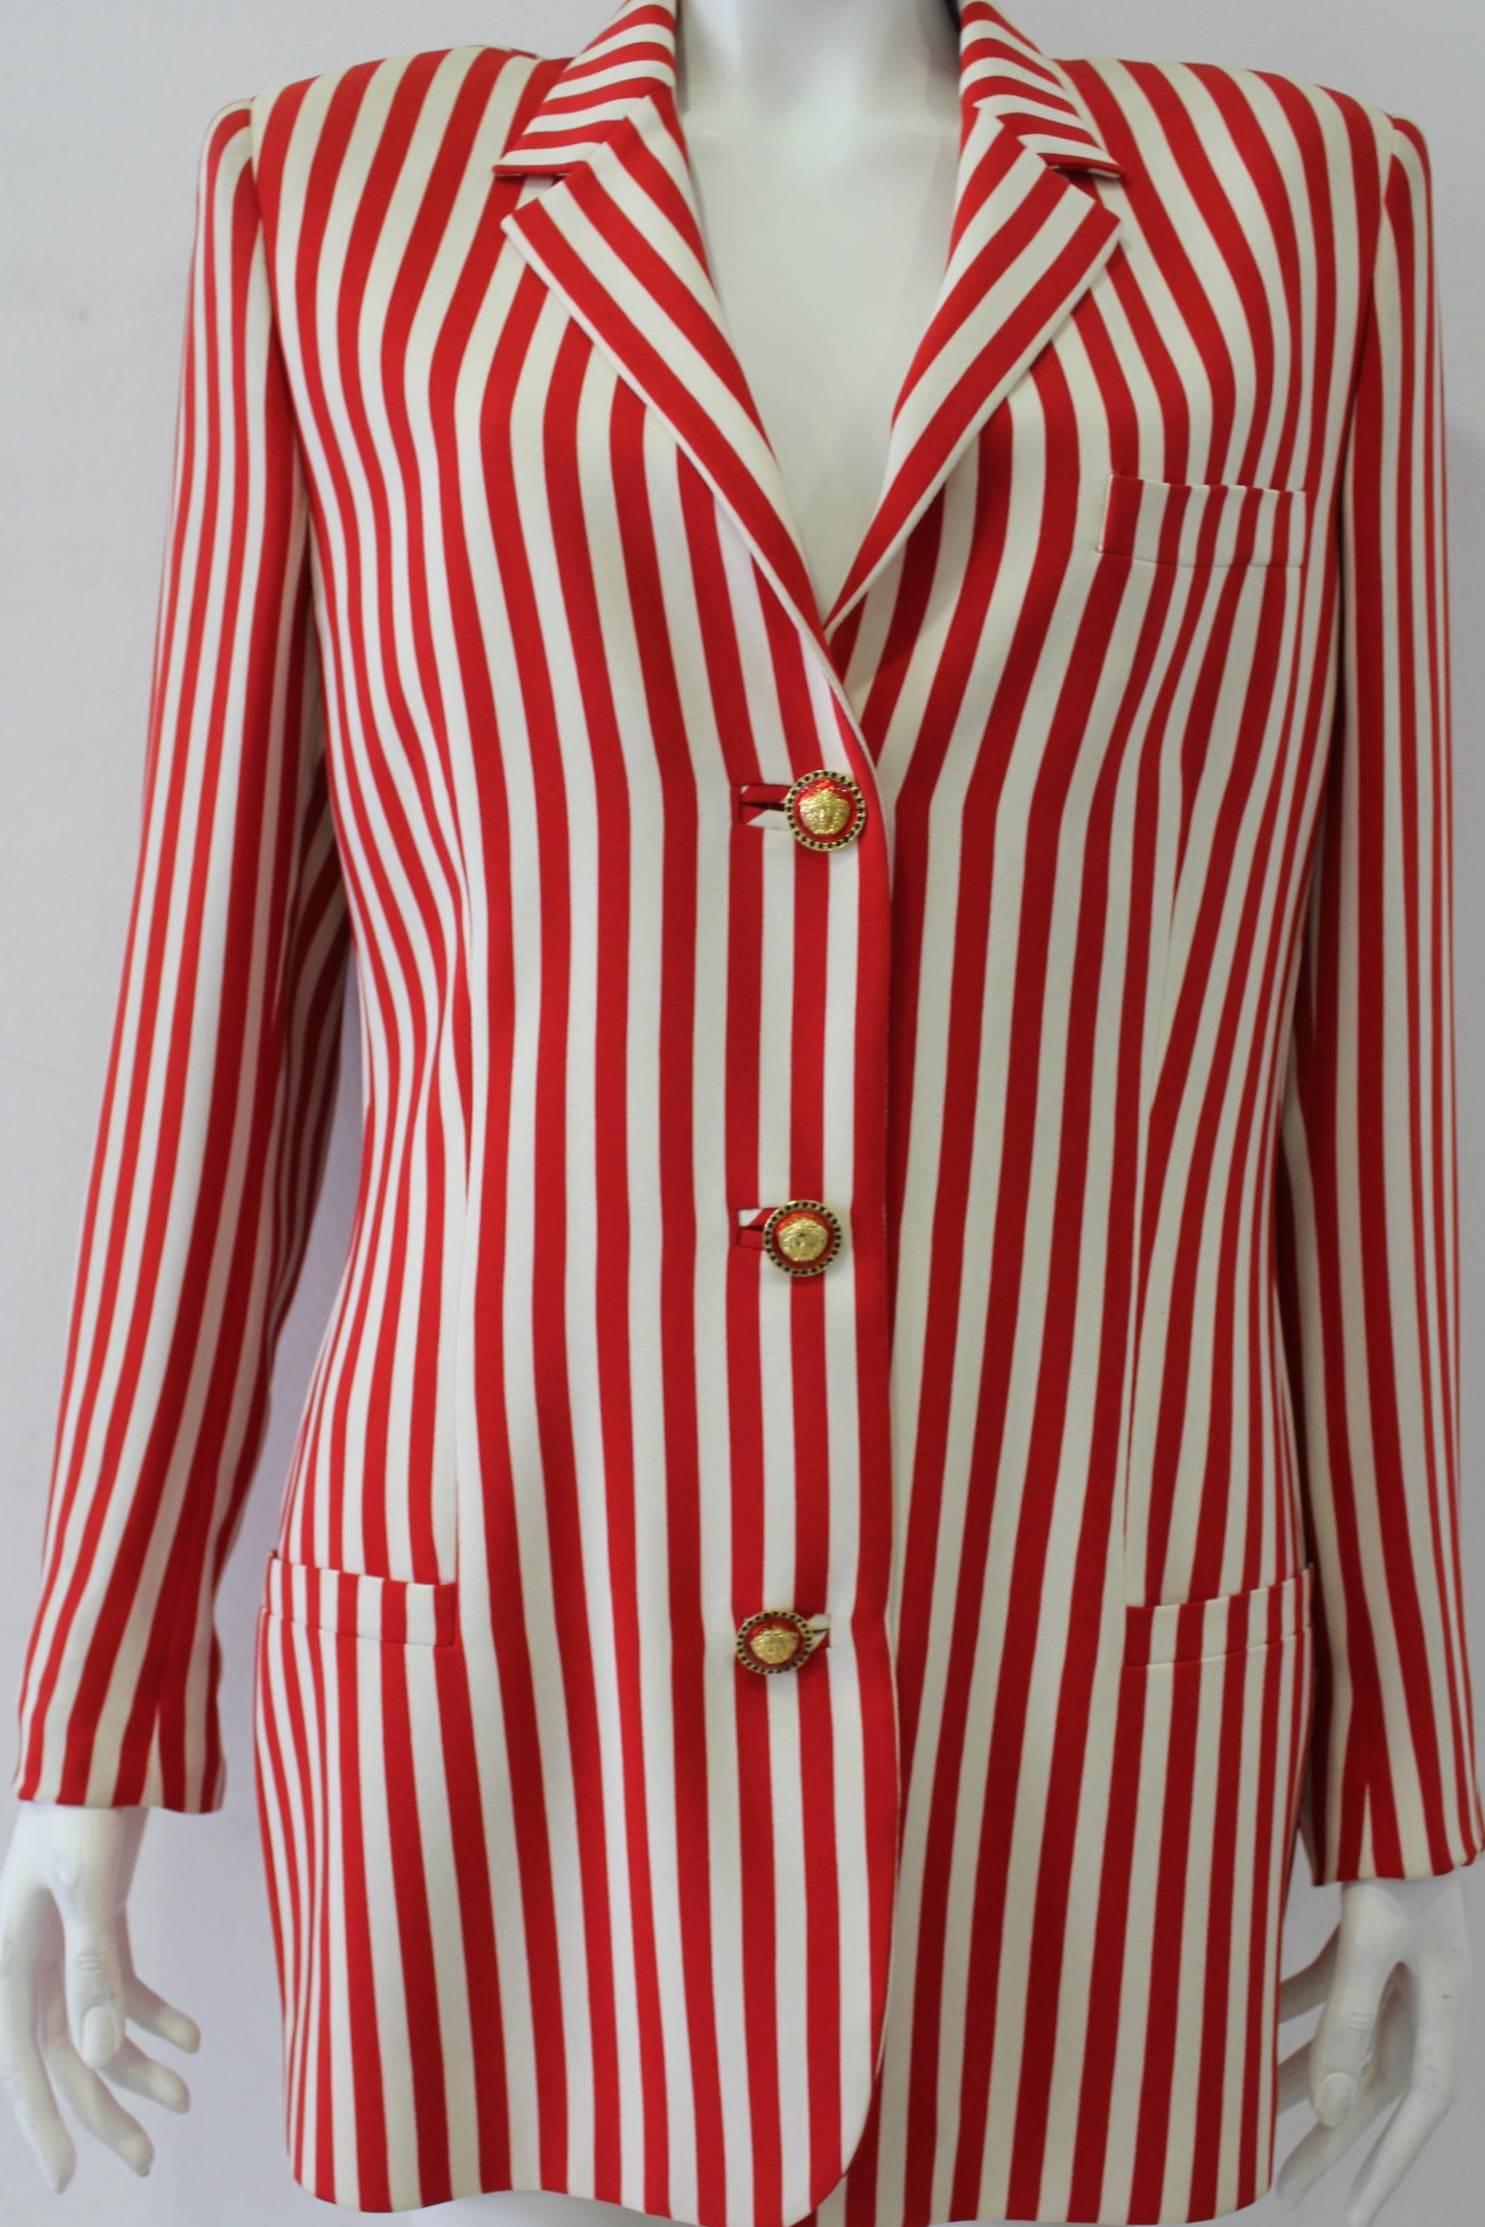 Outstanding Gianni Versace Couture Candy Striped Wool Blazer Featuring Ubiquitous Medusa Gold and Red Enamel Buttons, Spring 1993